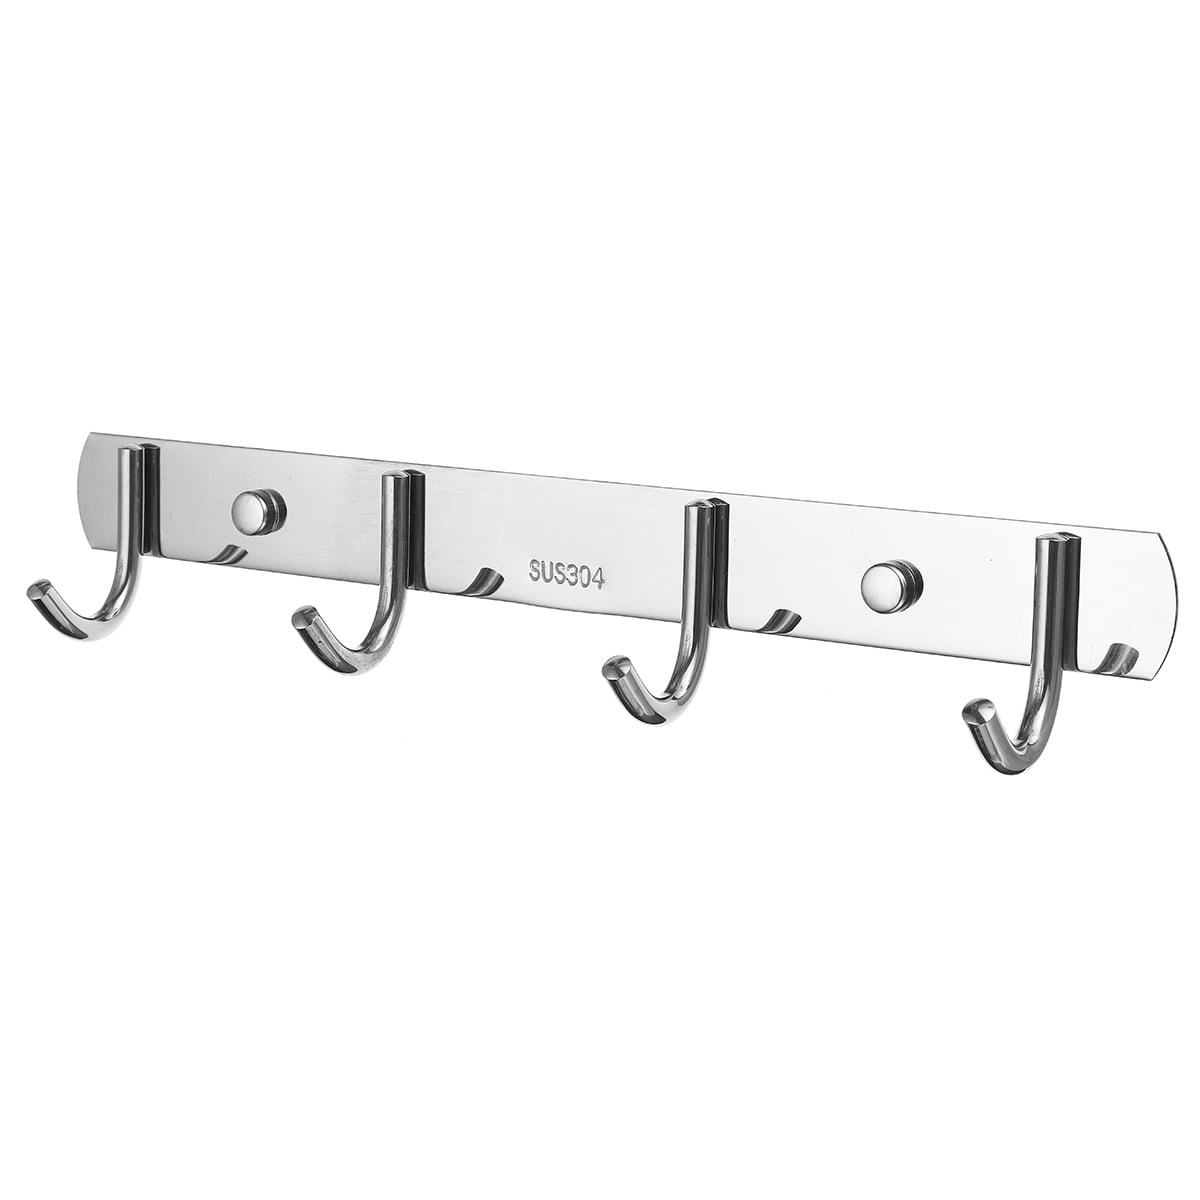 Hats Towel 3 Hooks Stainless Steel Heavy Duty Rail Bar Wall Coat Hangers Rack Wall Mount Coat Hook Scarves SUS 304 Brushed Stainless Steel Finish Rust and Water Proof for Coat Kitchen Utensil